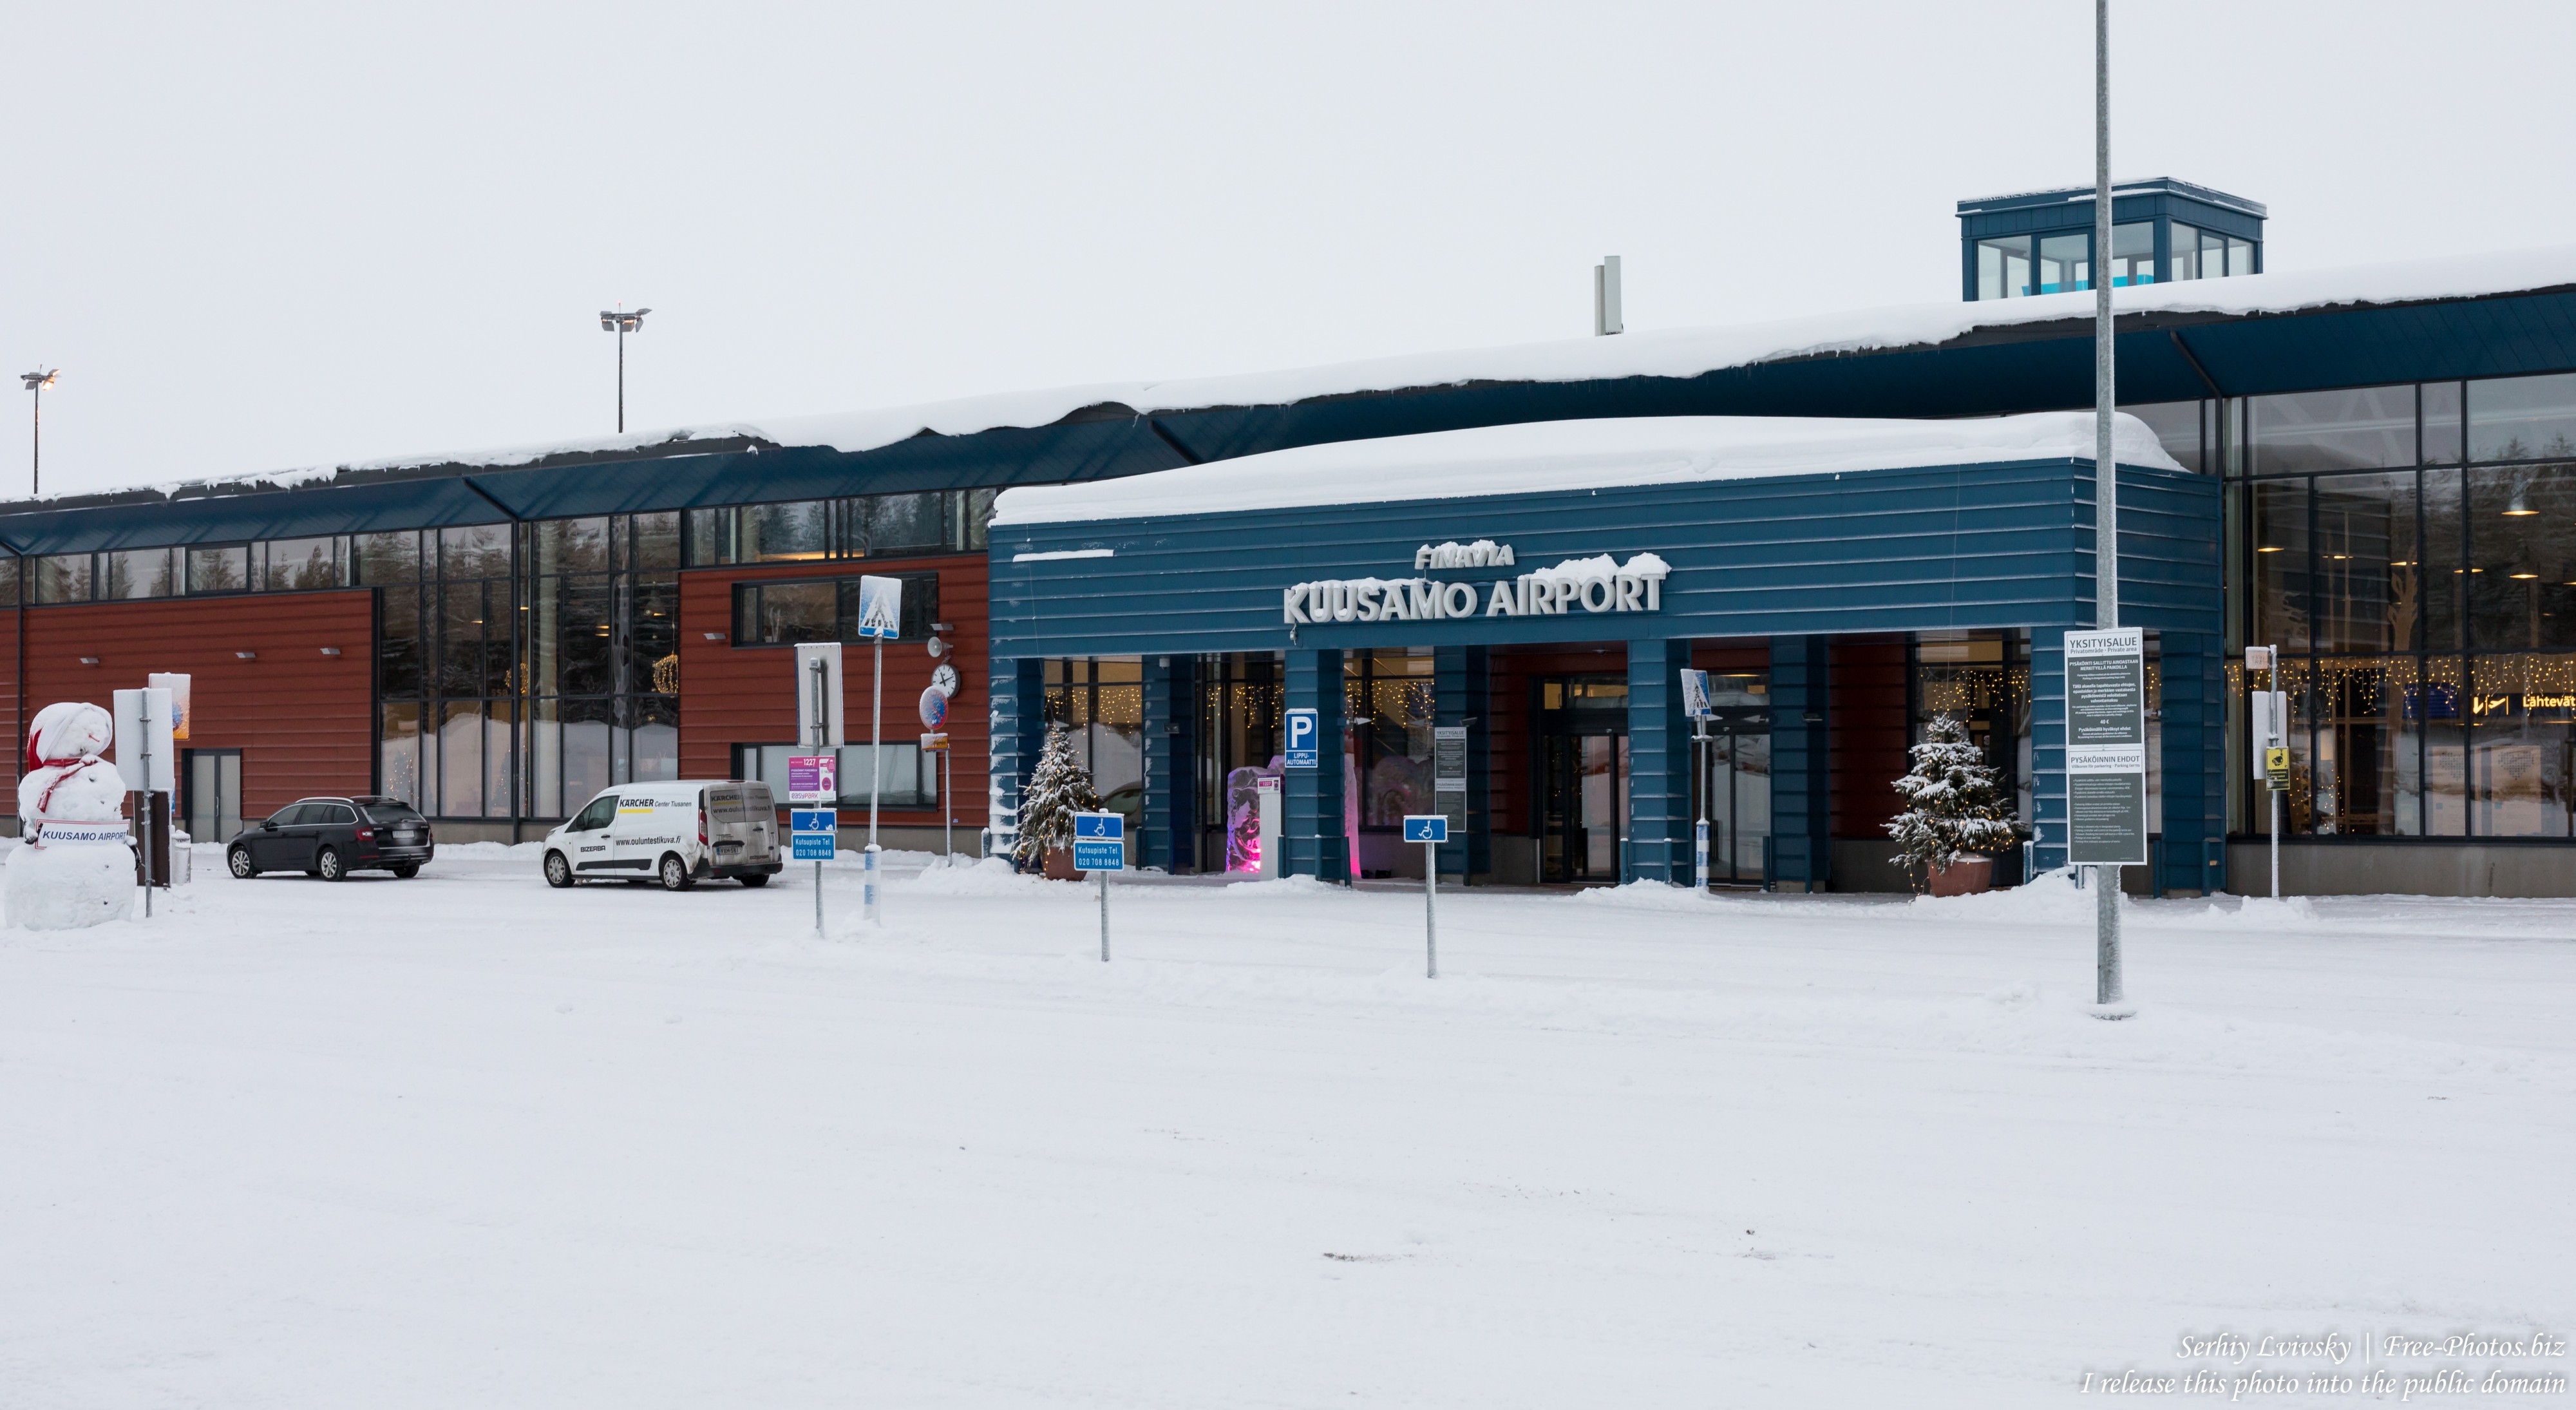 Kuusamo airport, Finland, photographed in January 2020 by Serhiy Lvivsky, picture 1